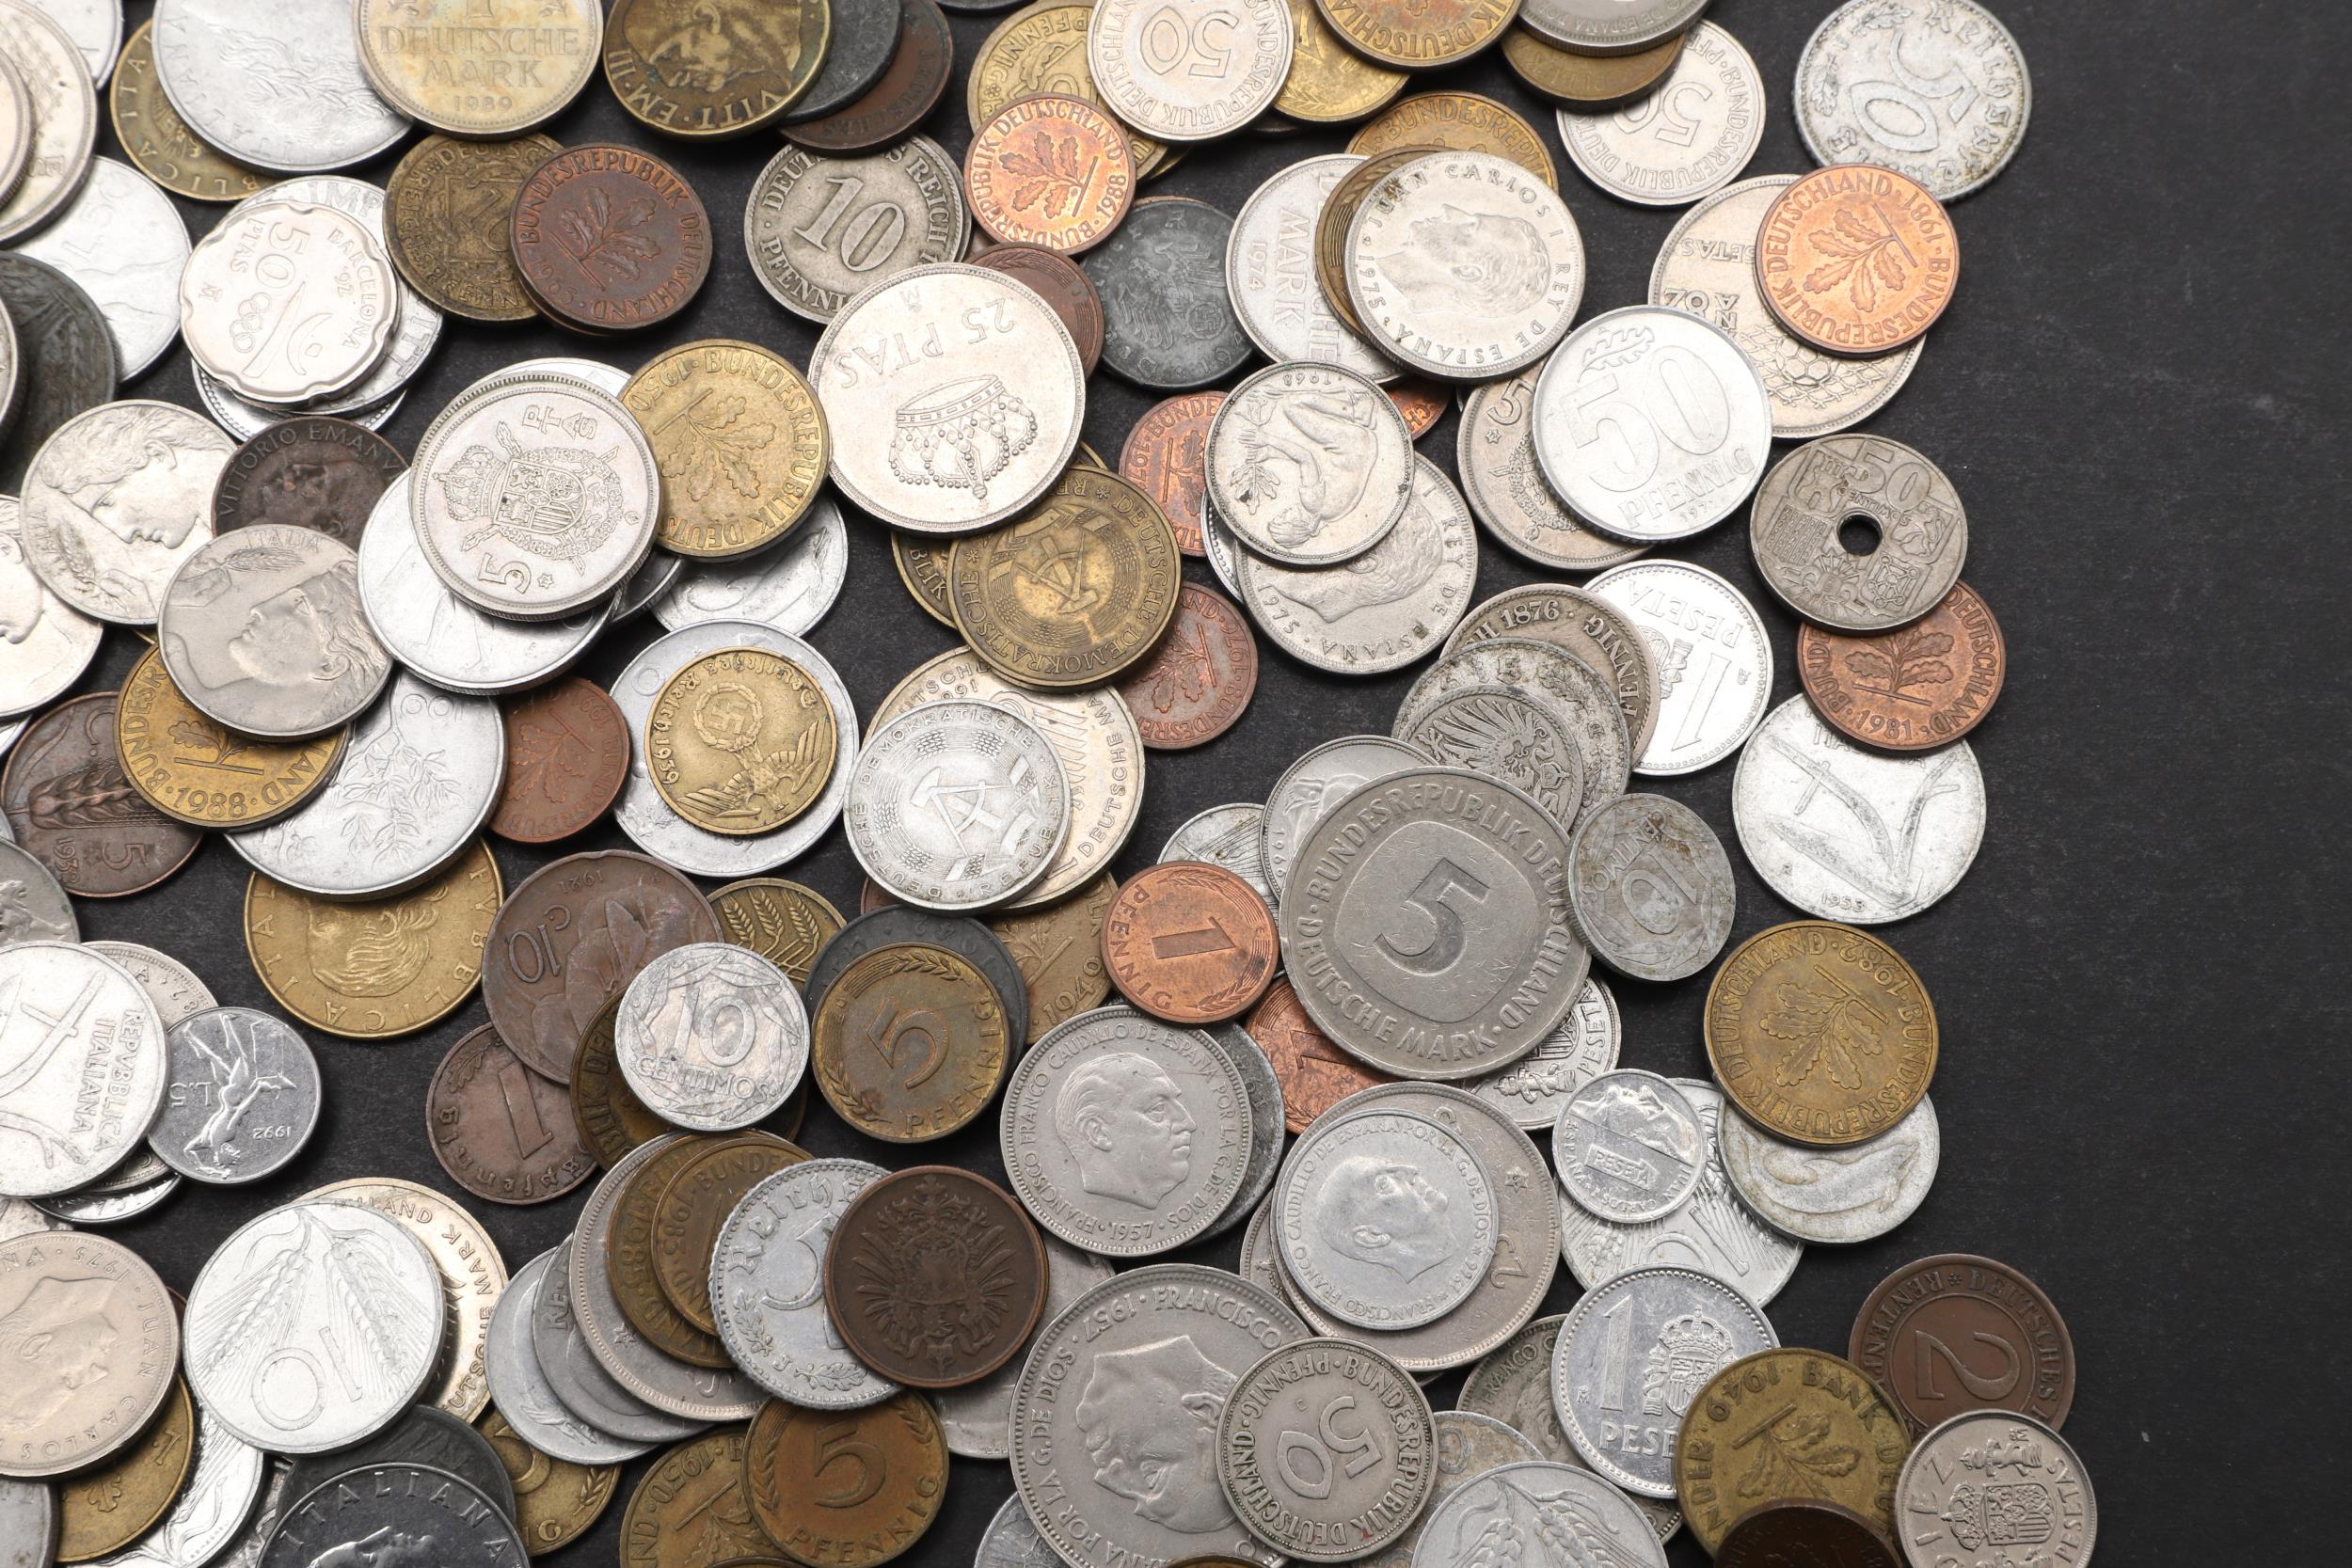 A LARGE COLLECTION OF 19TH AND 20th CENTURY EUROPEAN COINS TO INCLUDE GERMANY, SPAIN AND ITALY. - Image 7 of 10